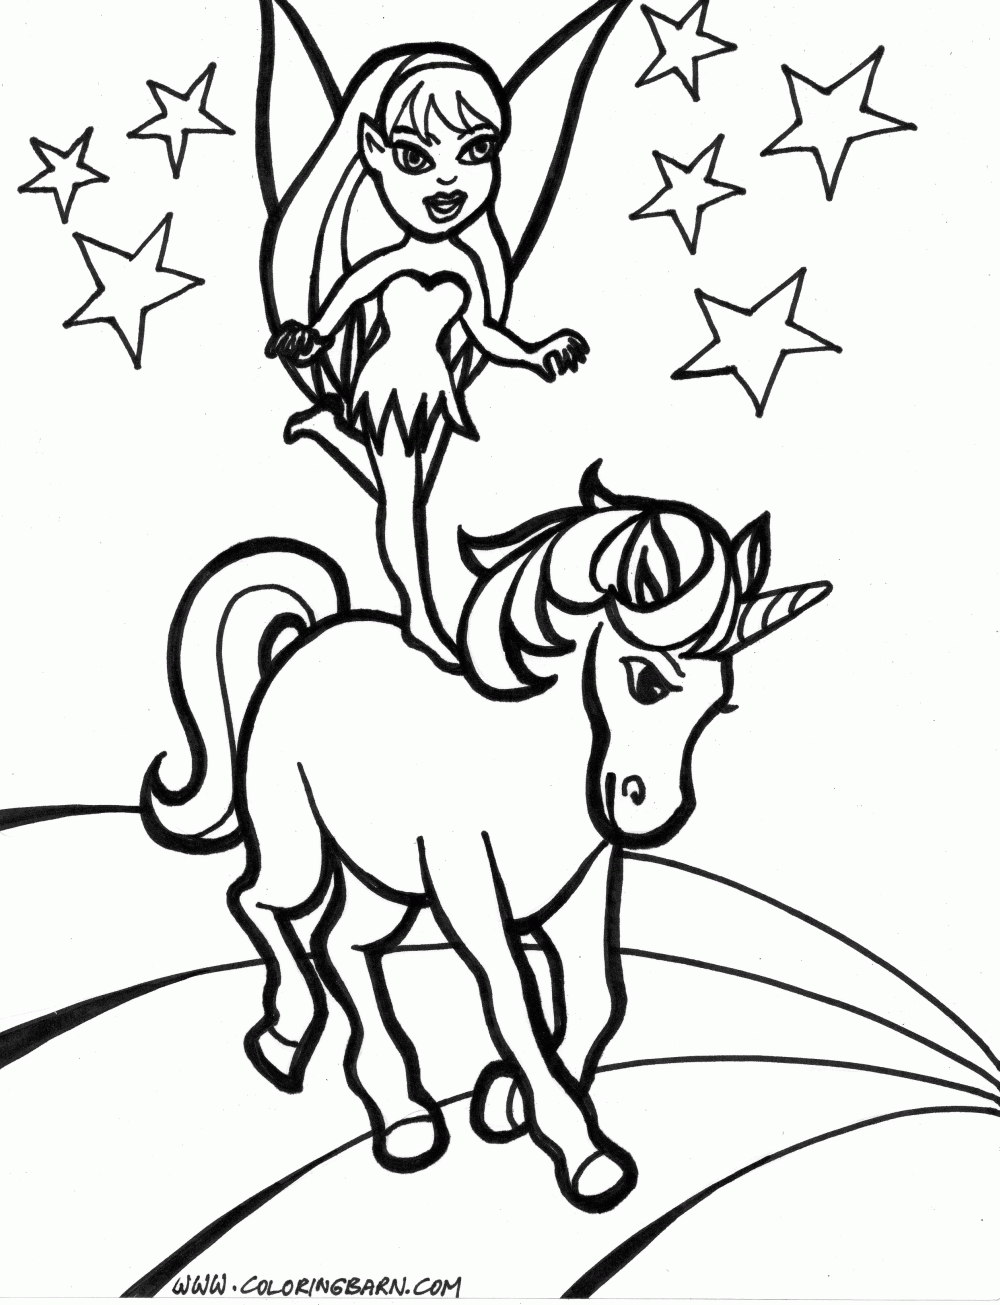 Free Unicorn And Princess Coloring Pages Download Free Clip Art Free Clip Art On Clipart Library